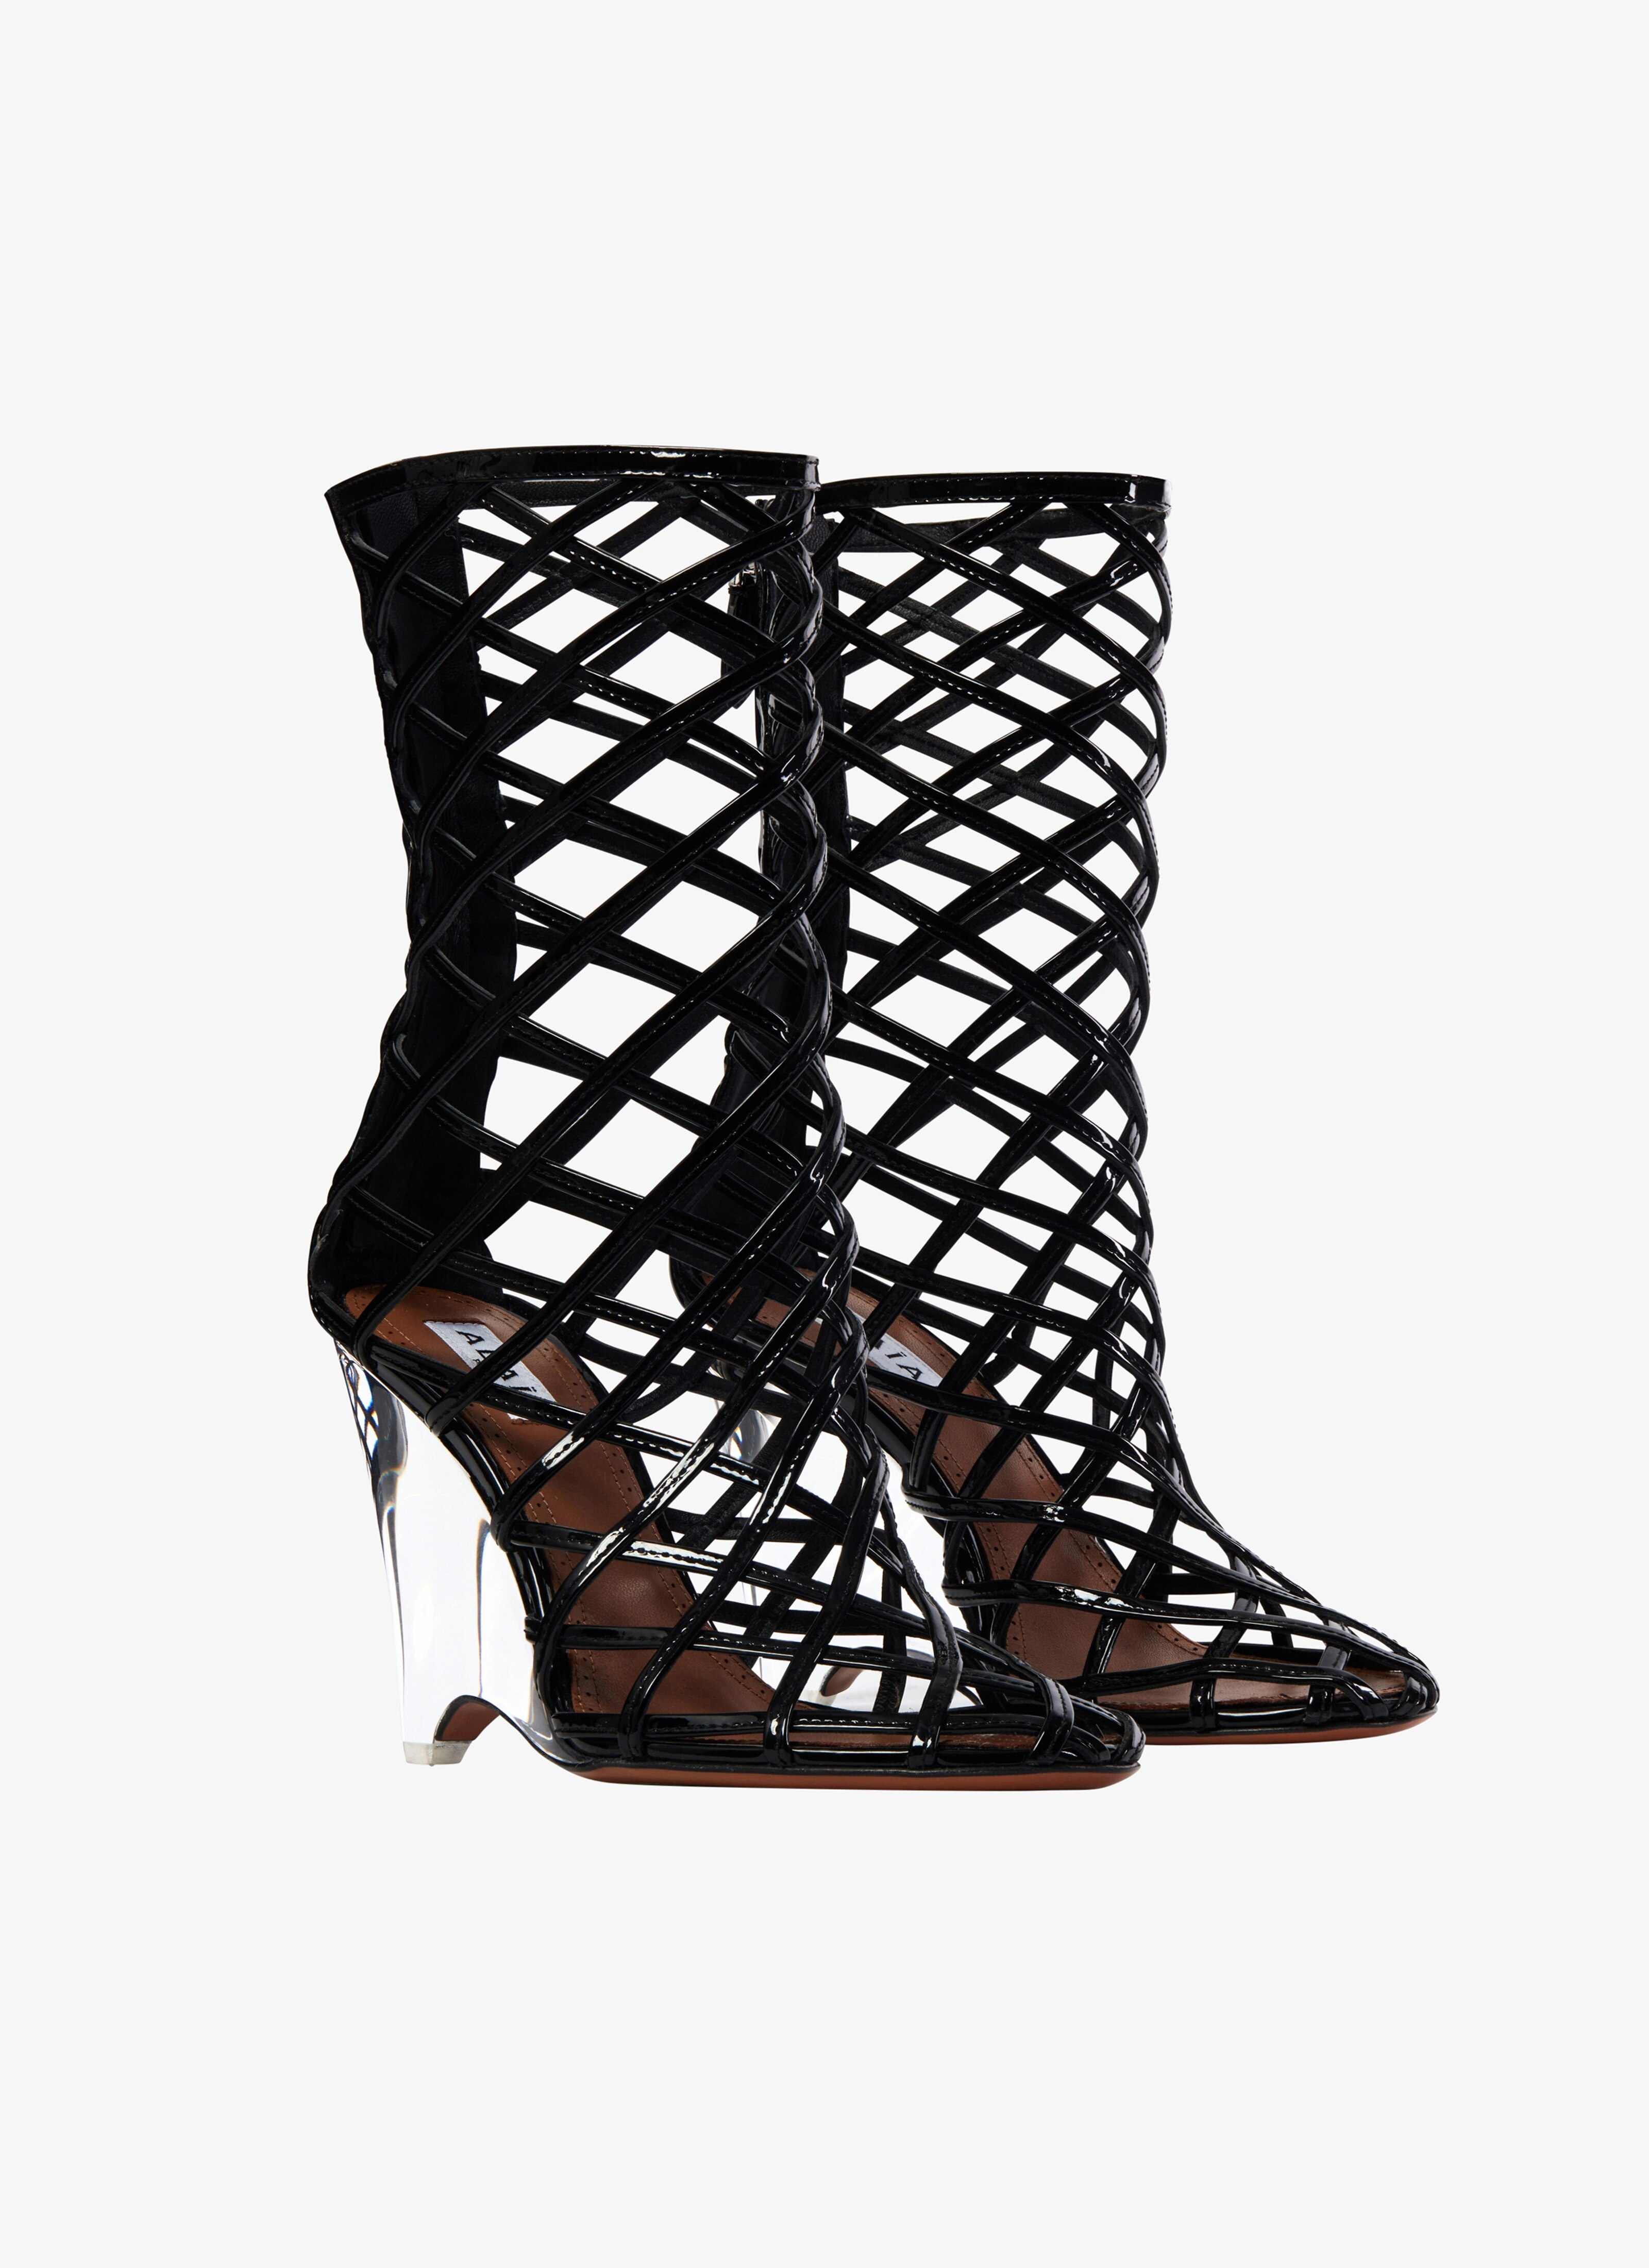 LA CAGE WEDGE BOOTIES IN PATENT LAMBSKIN - 2